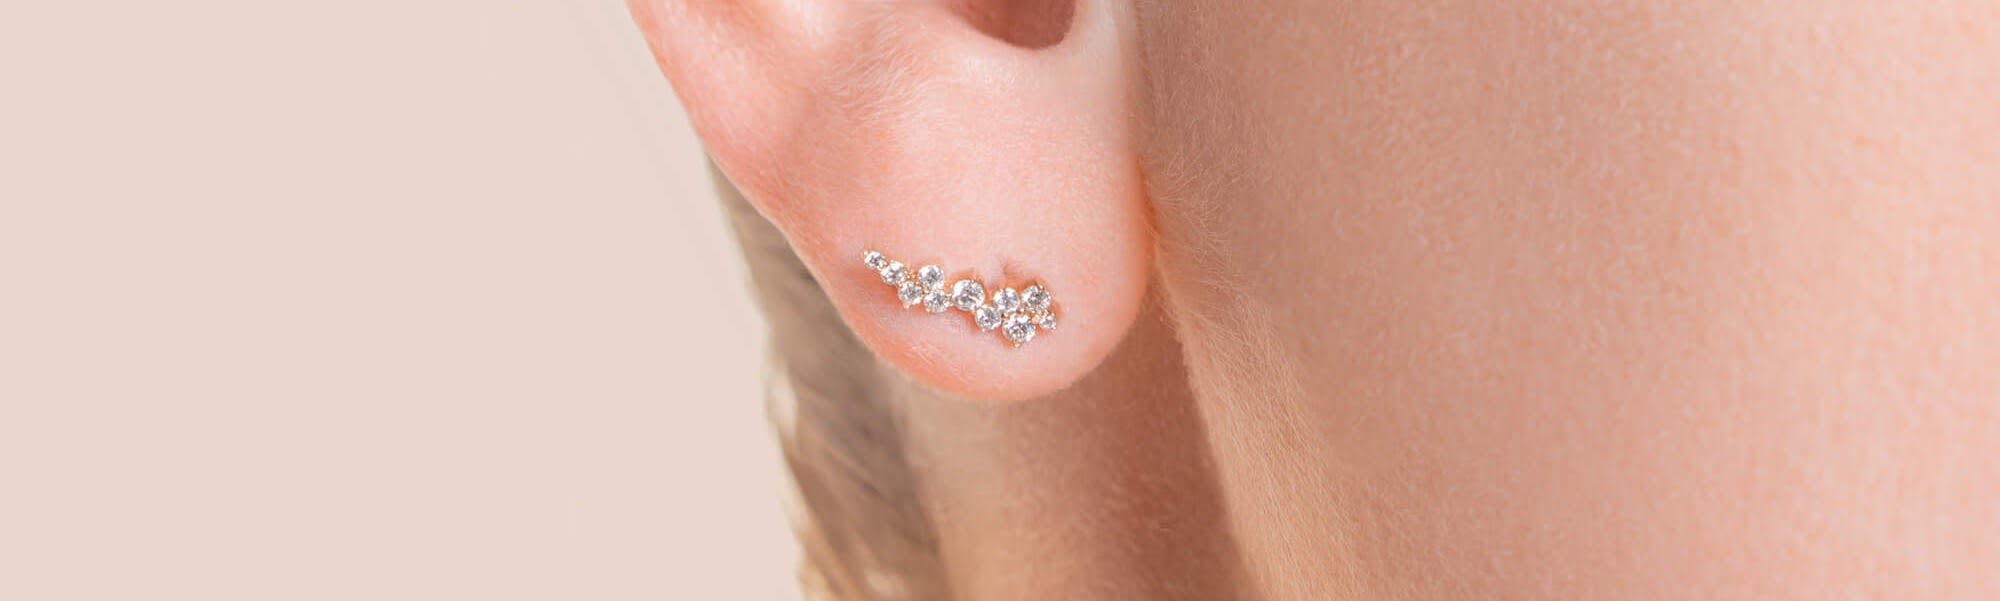 Cluster Earring Climbers in 14K White Gold